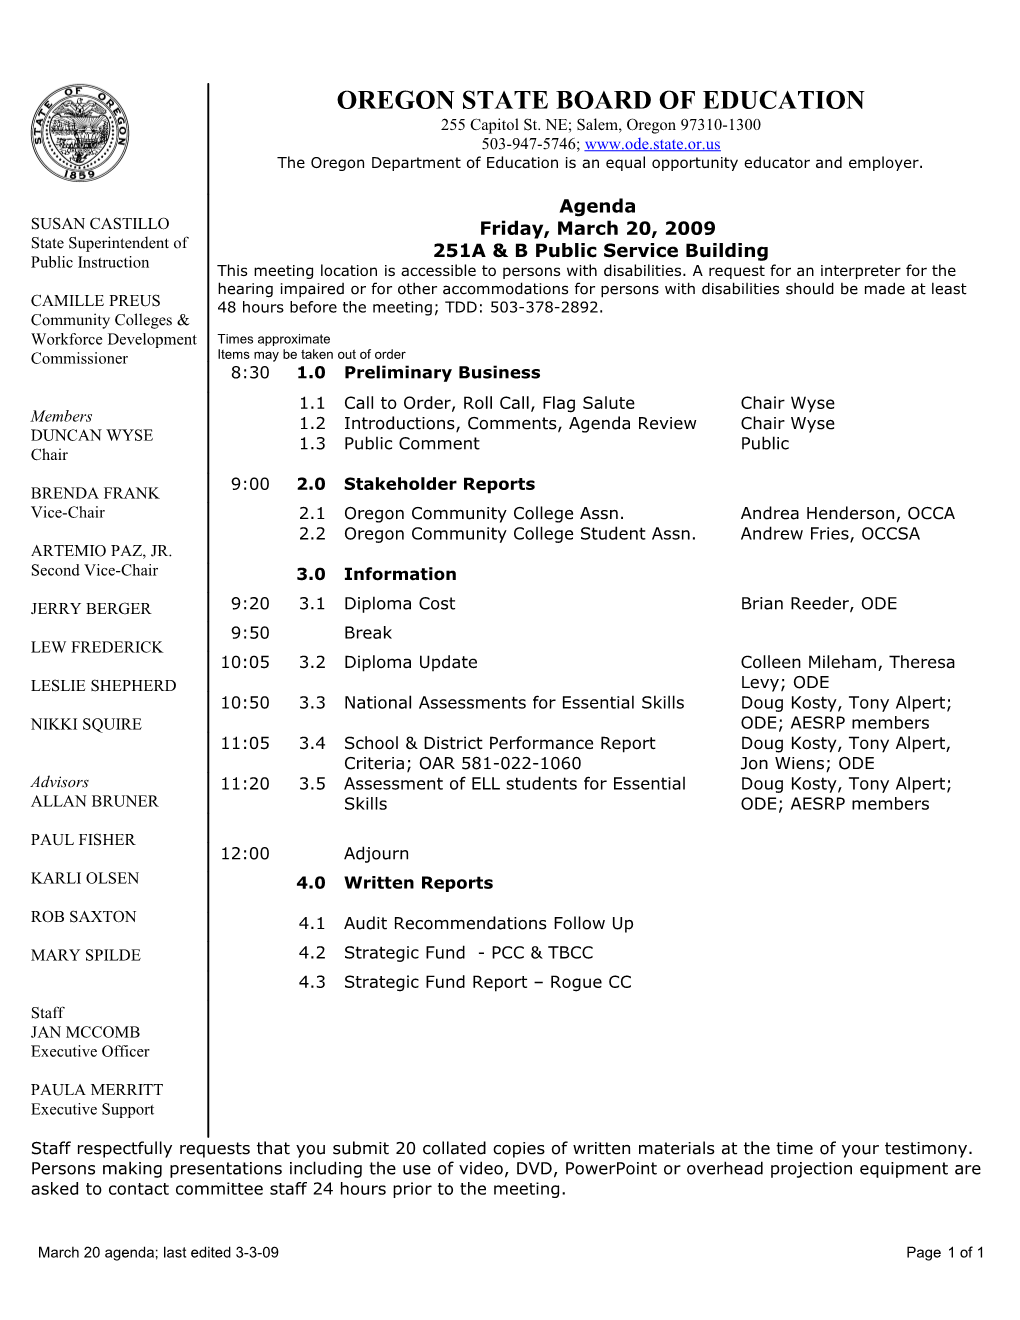 March 20 Agenda; Last Edited 3-3-09 Page 1 of 1